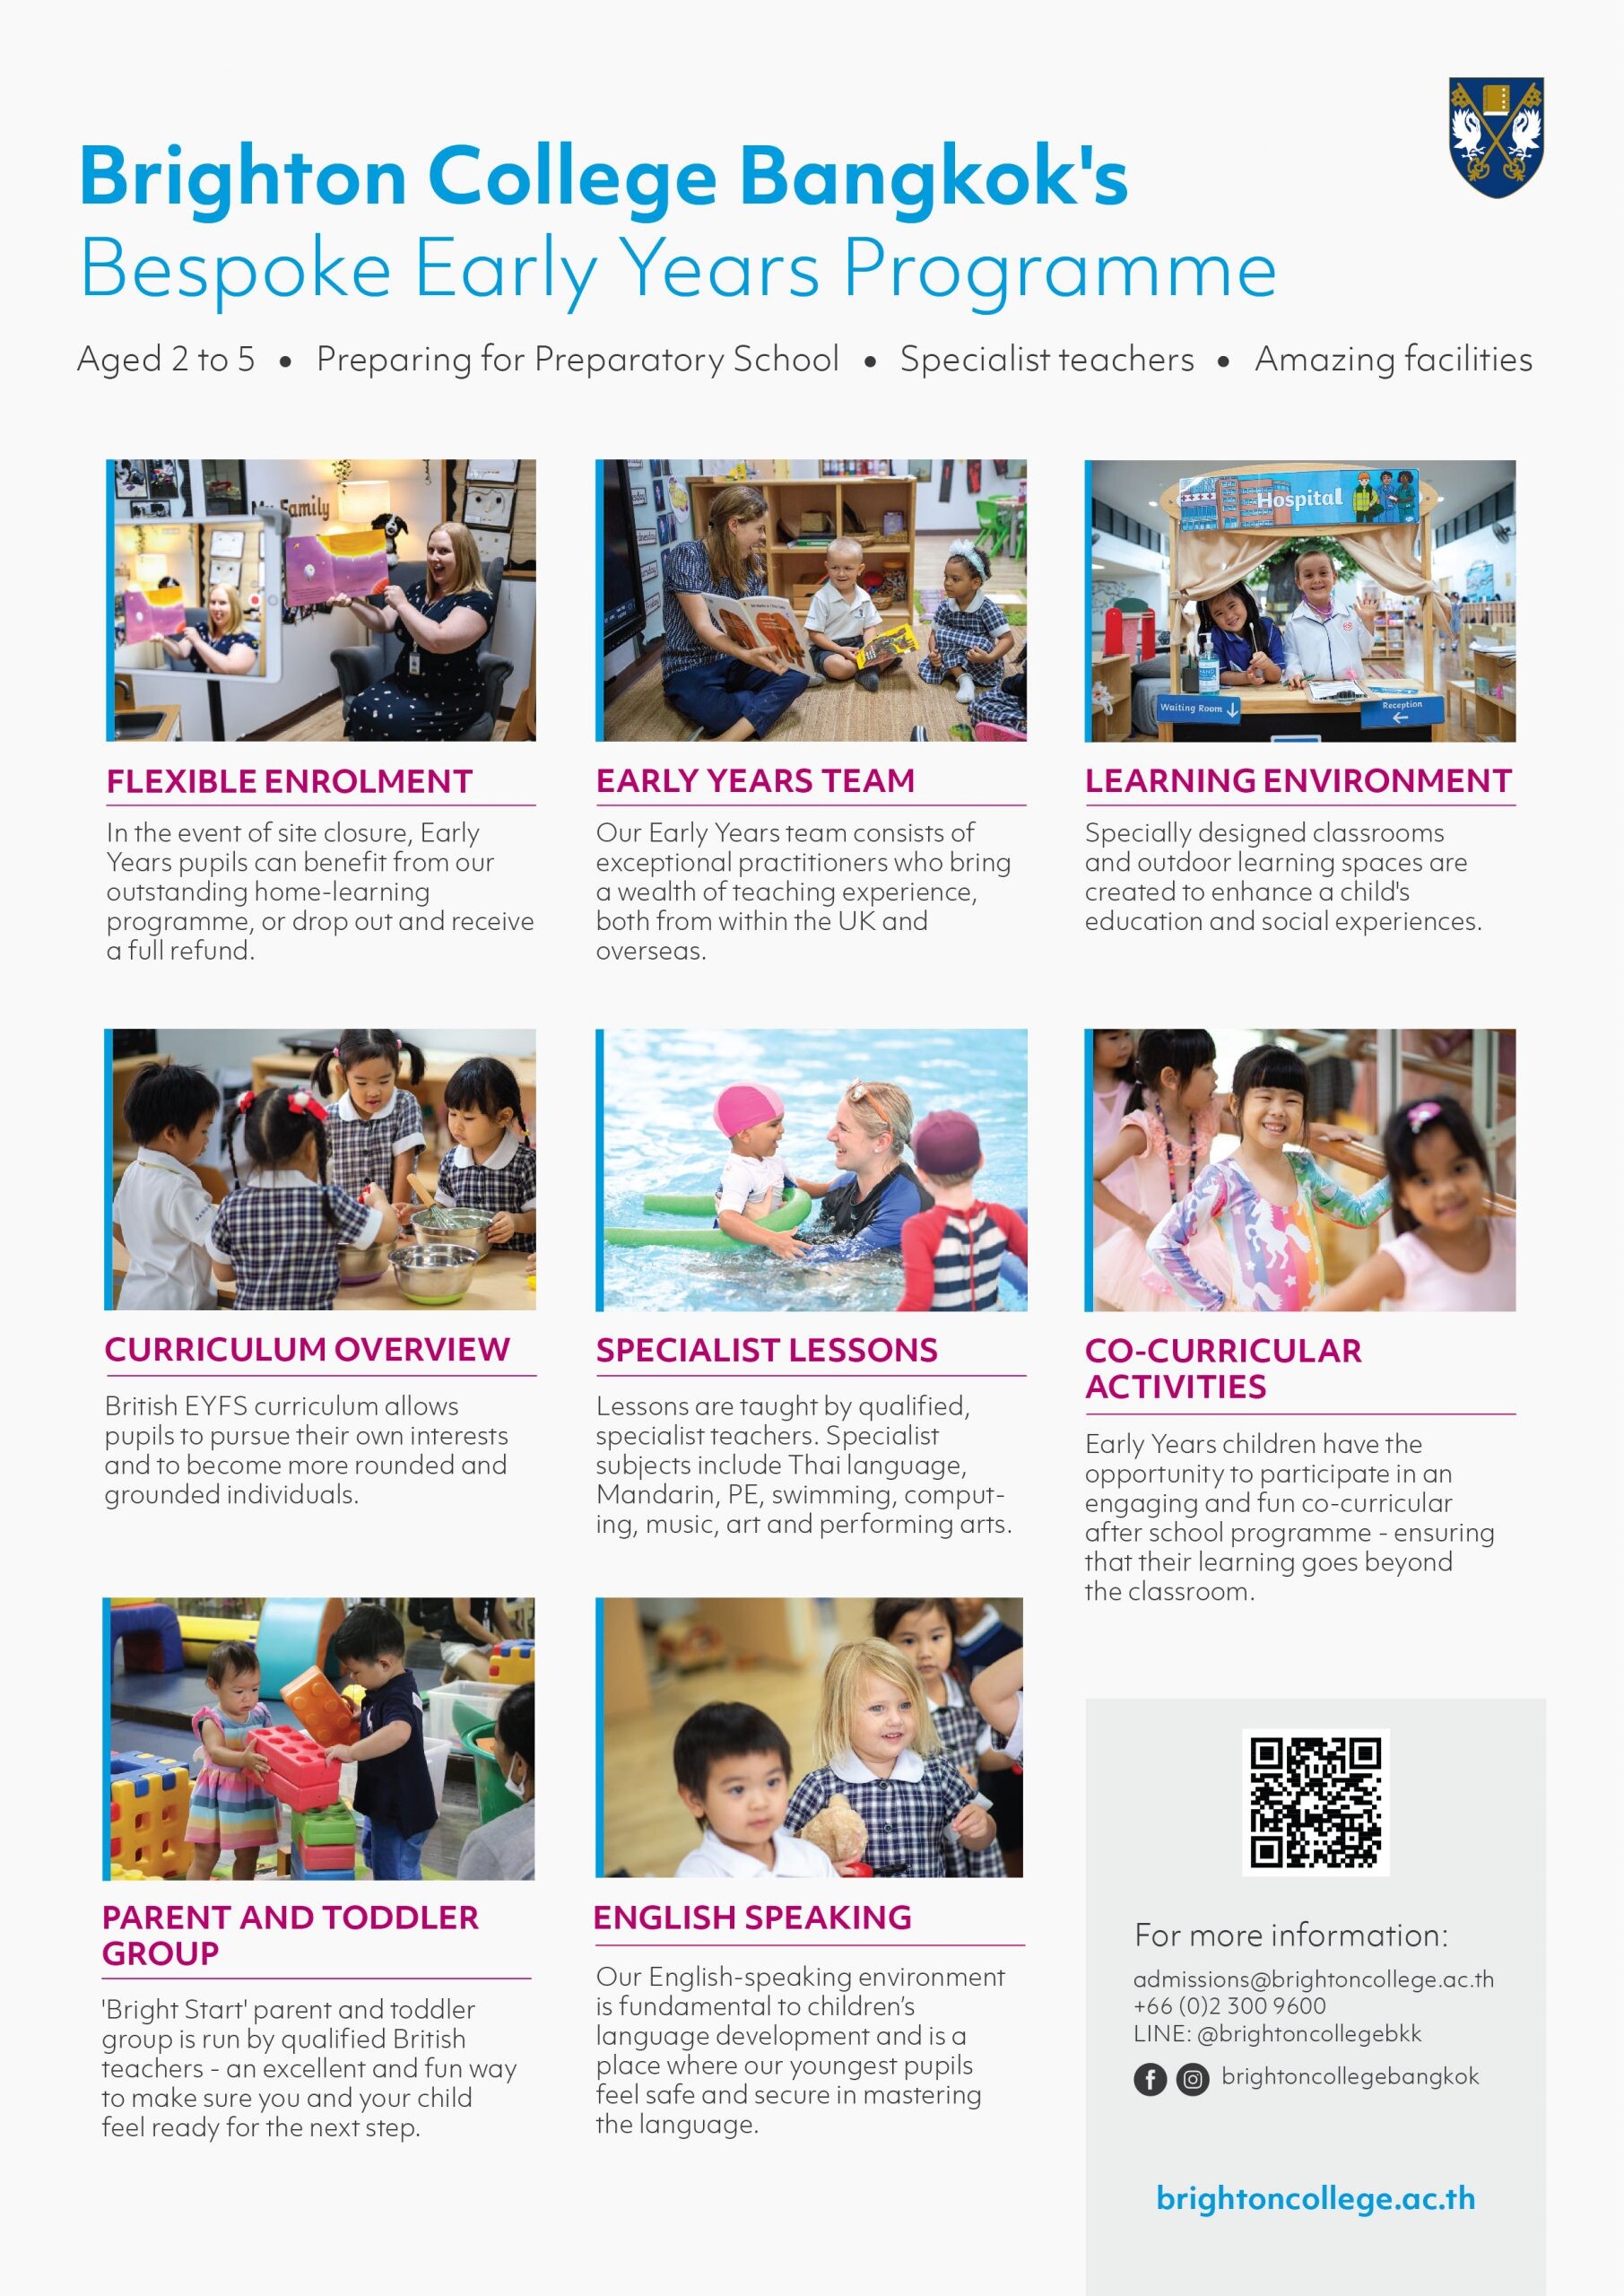 Brighton College Bangkok's bespoke Early Years Programme - where we nurture our pupils, from ages 2 to 5, preparing them for a smooth transition into the Preparatory School